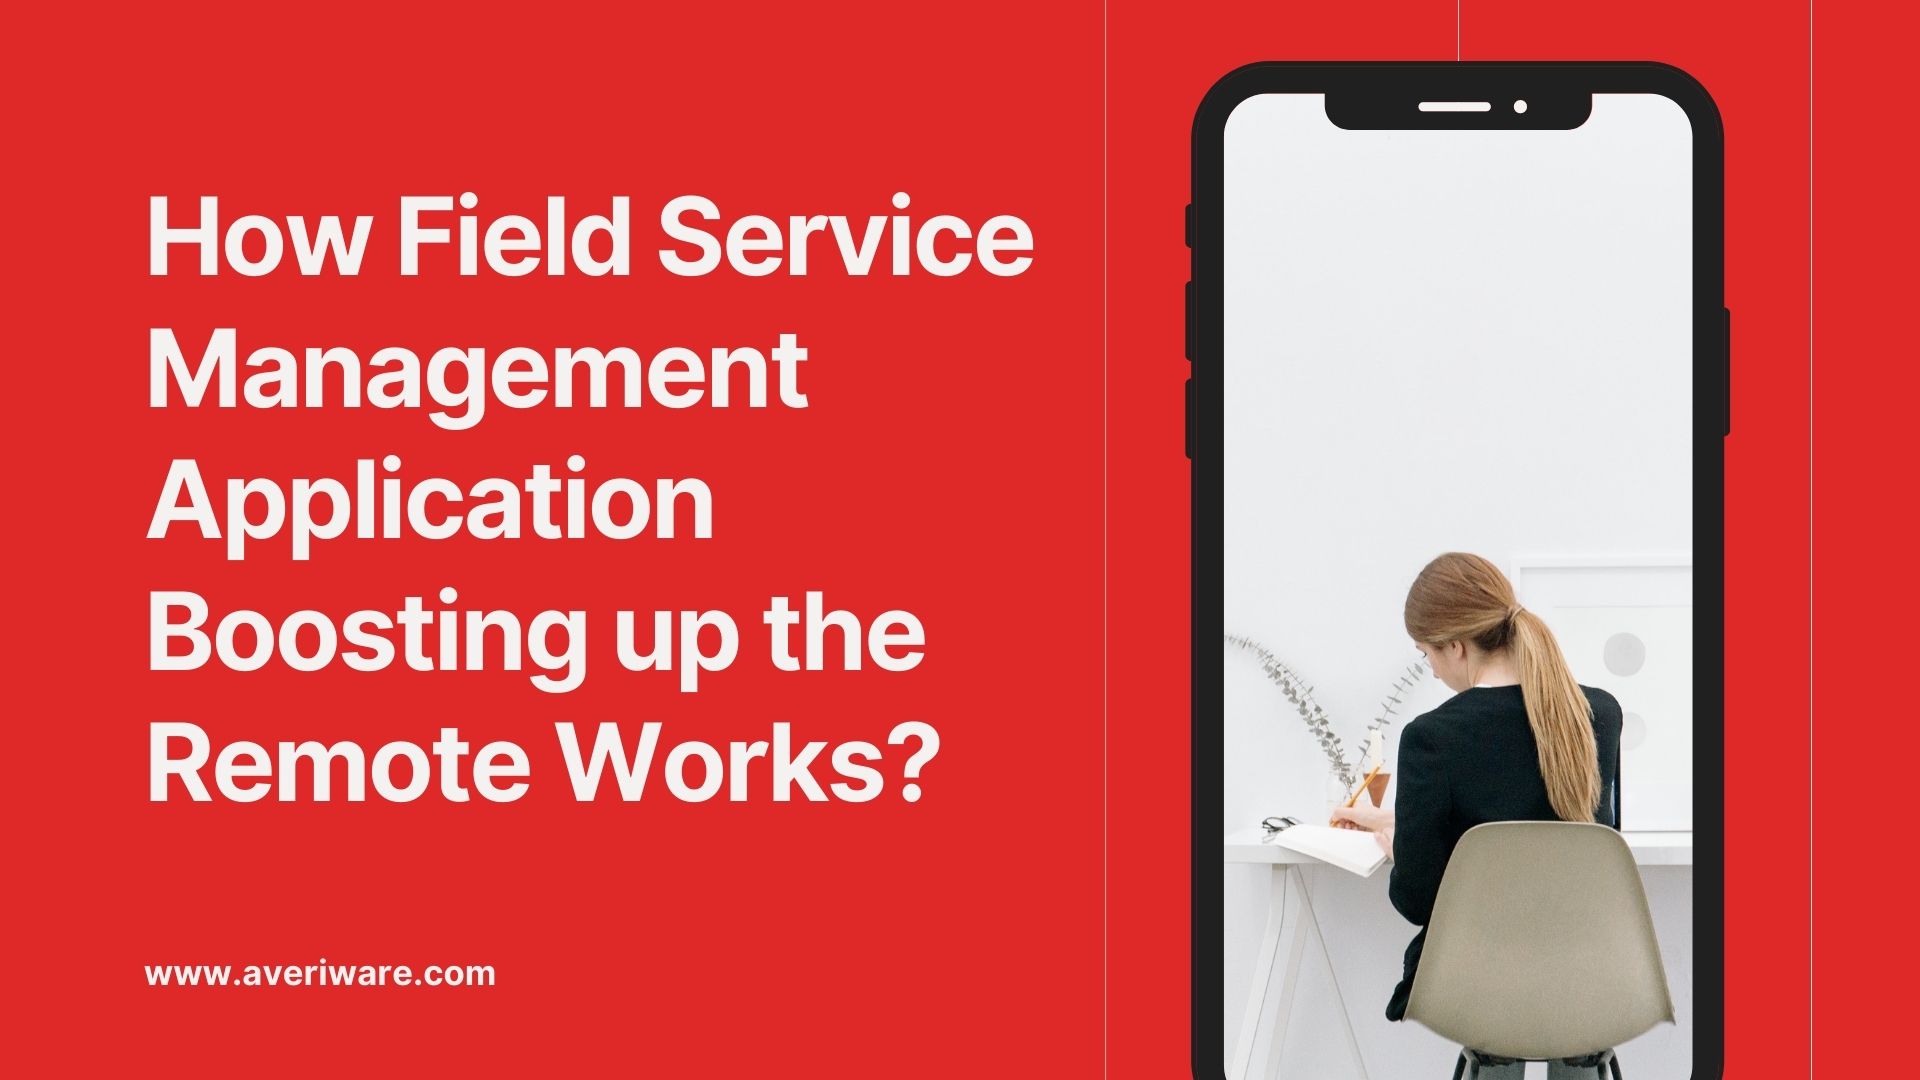 How Field Service Management Application Boosting up the Remote Work?